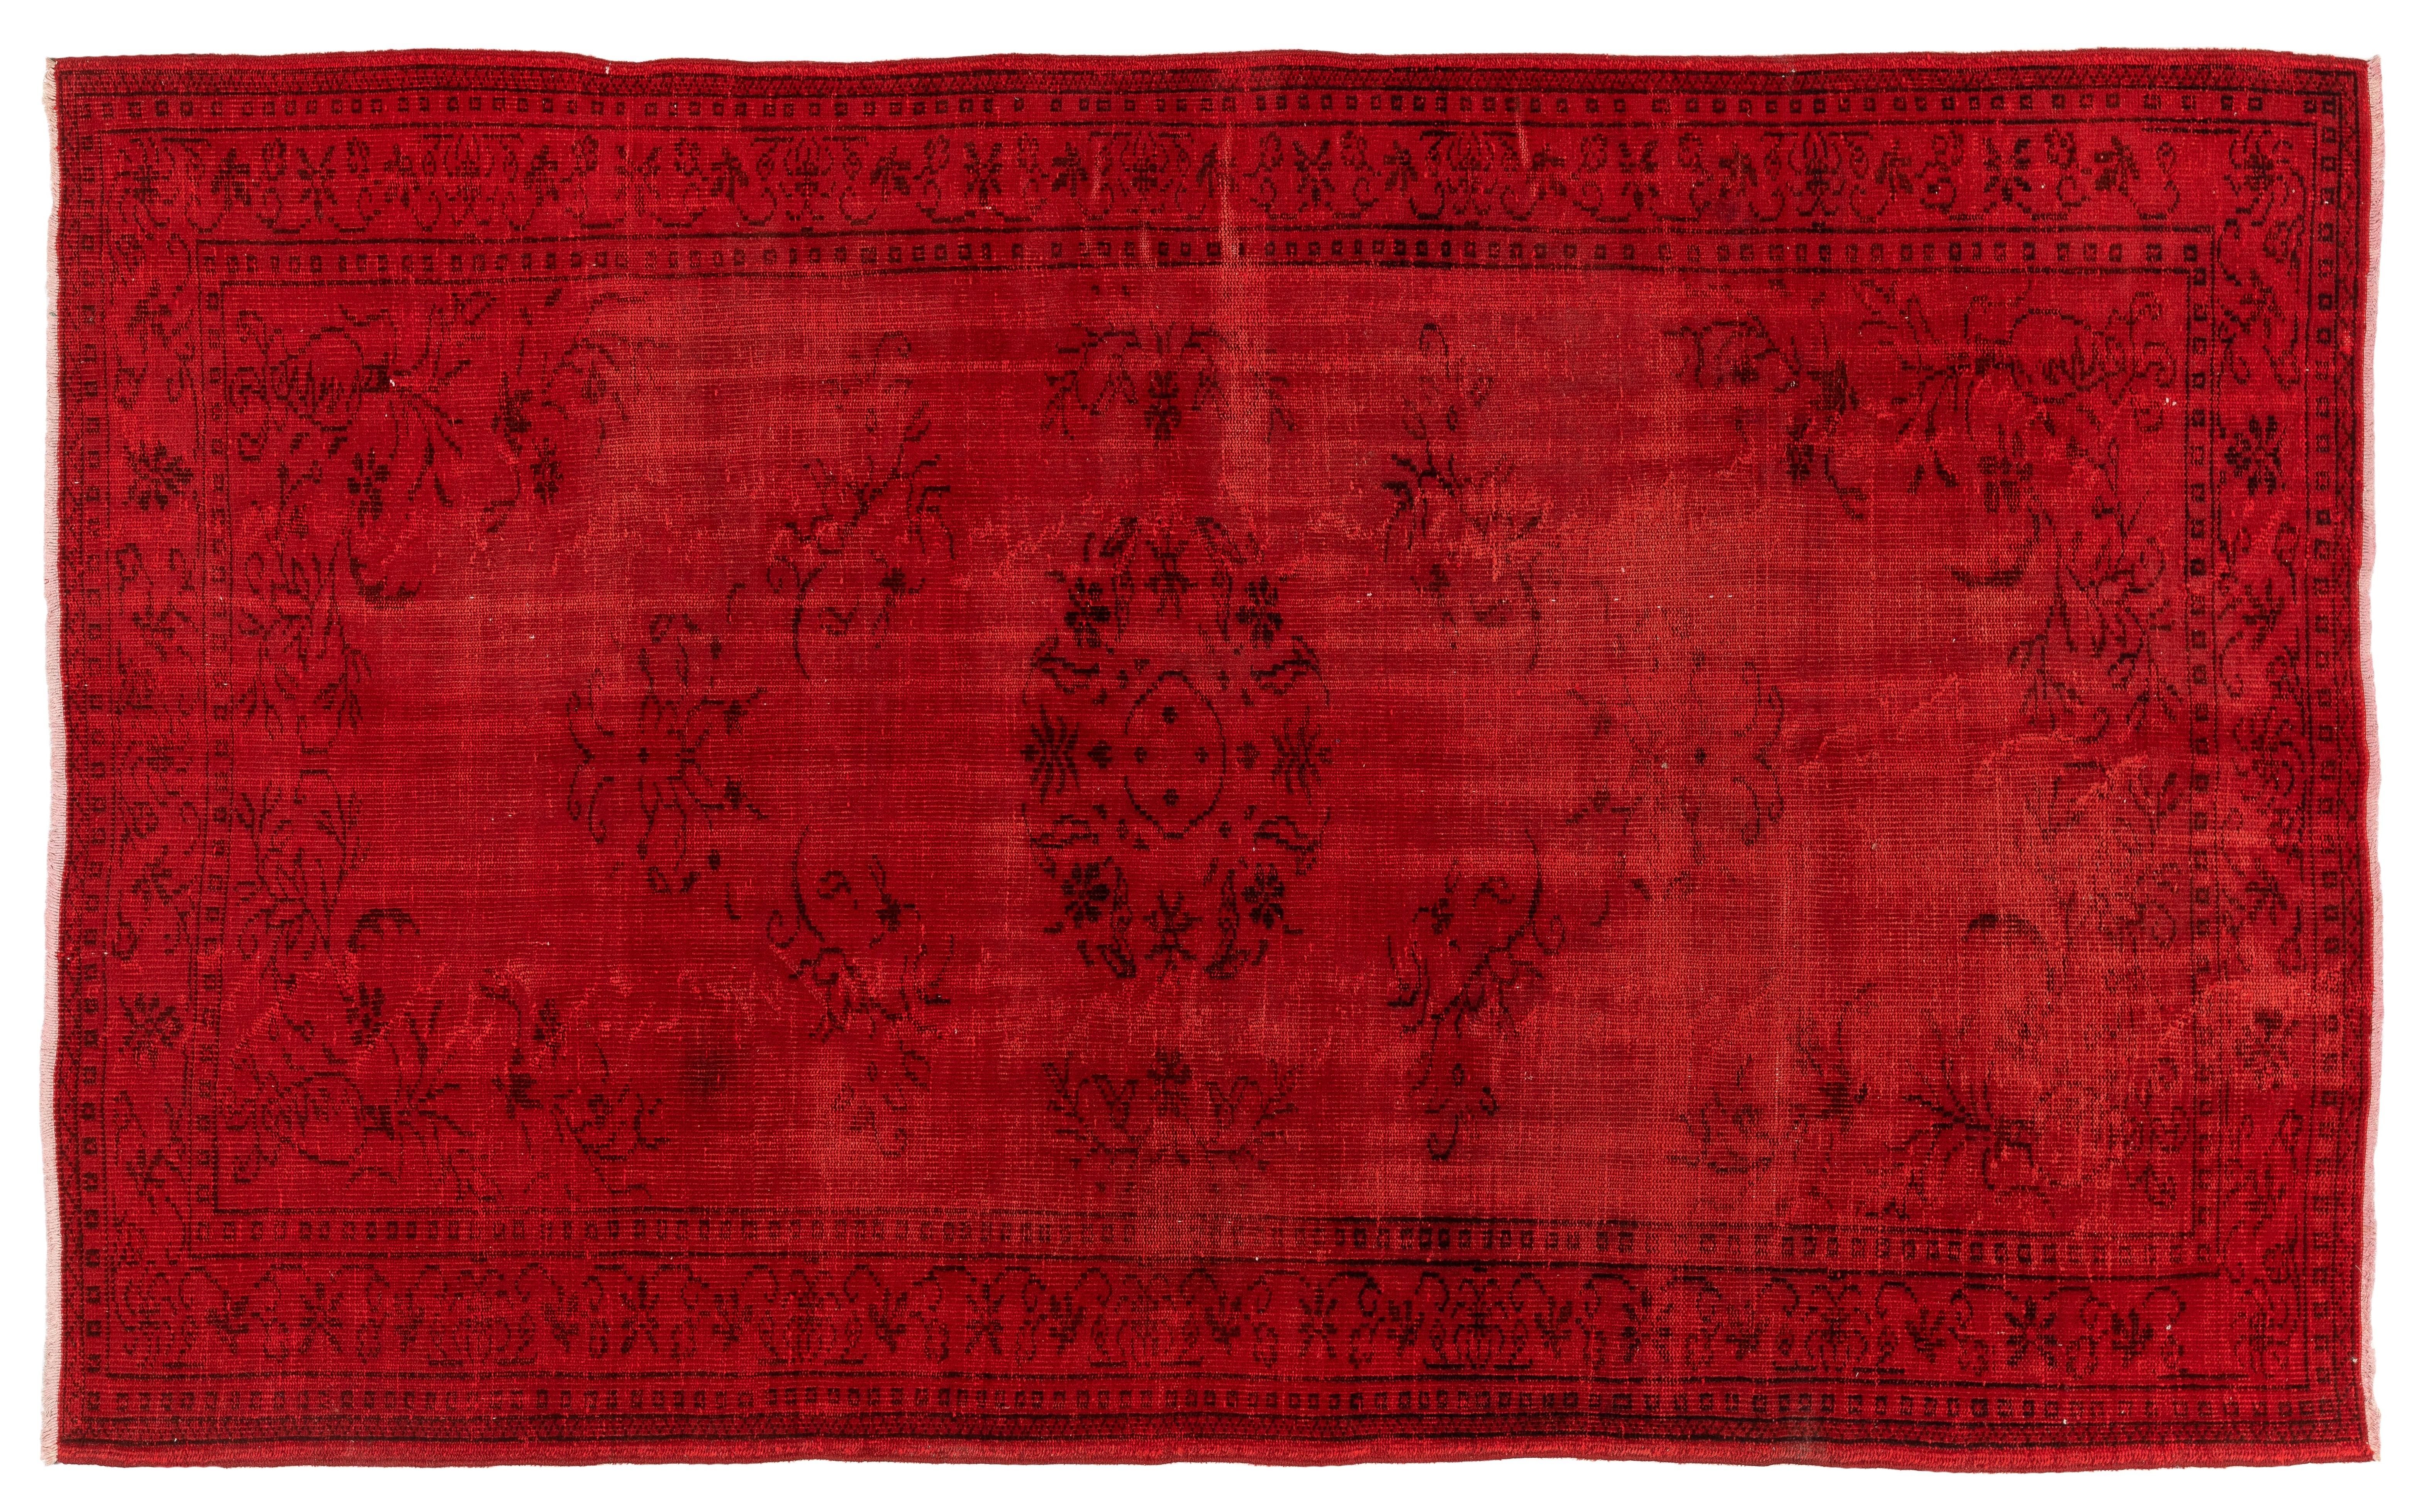 Mid-20th Century 5.8 x 8.8 Ft Vintage Rug Overdyed in Red. Great for Modern Home & Office Decor